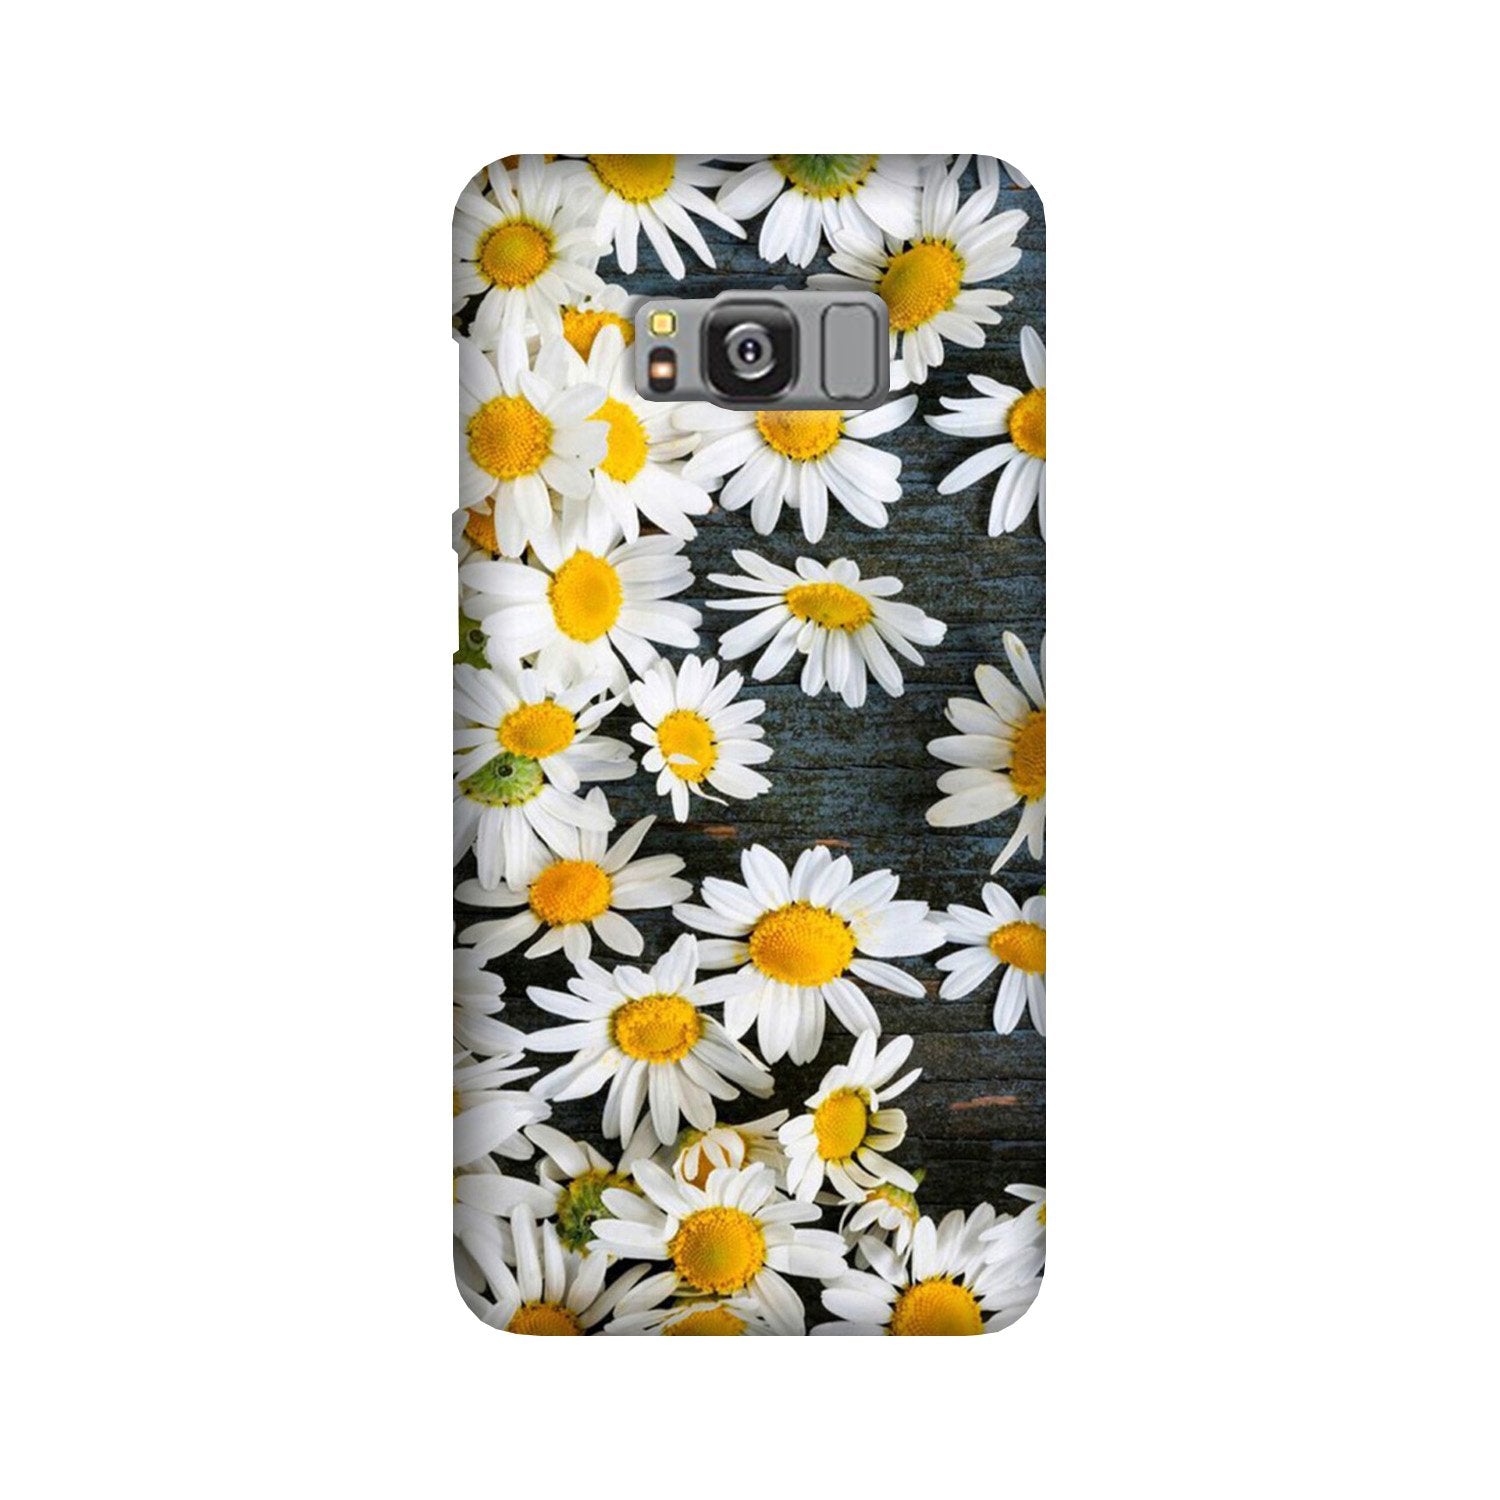 White flowers2 Case for Galaxy S8